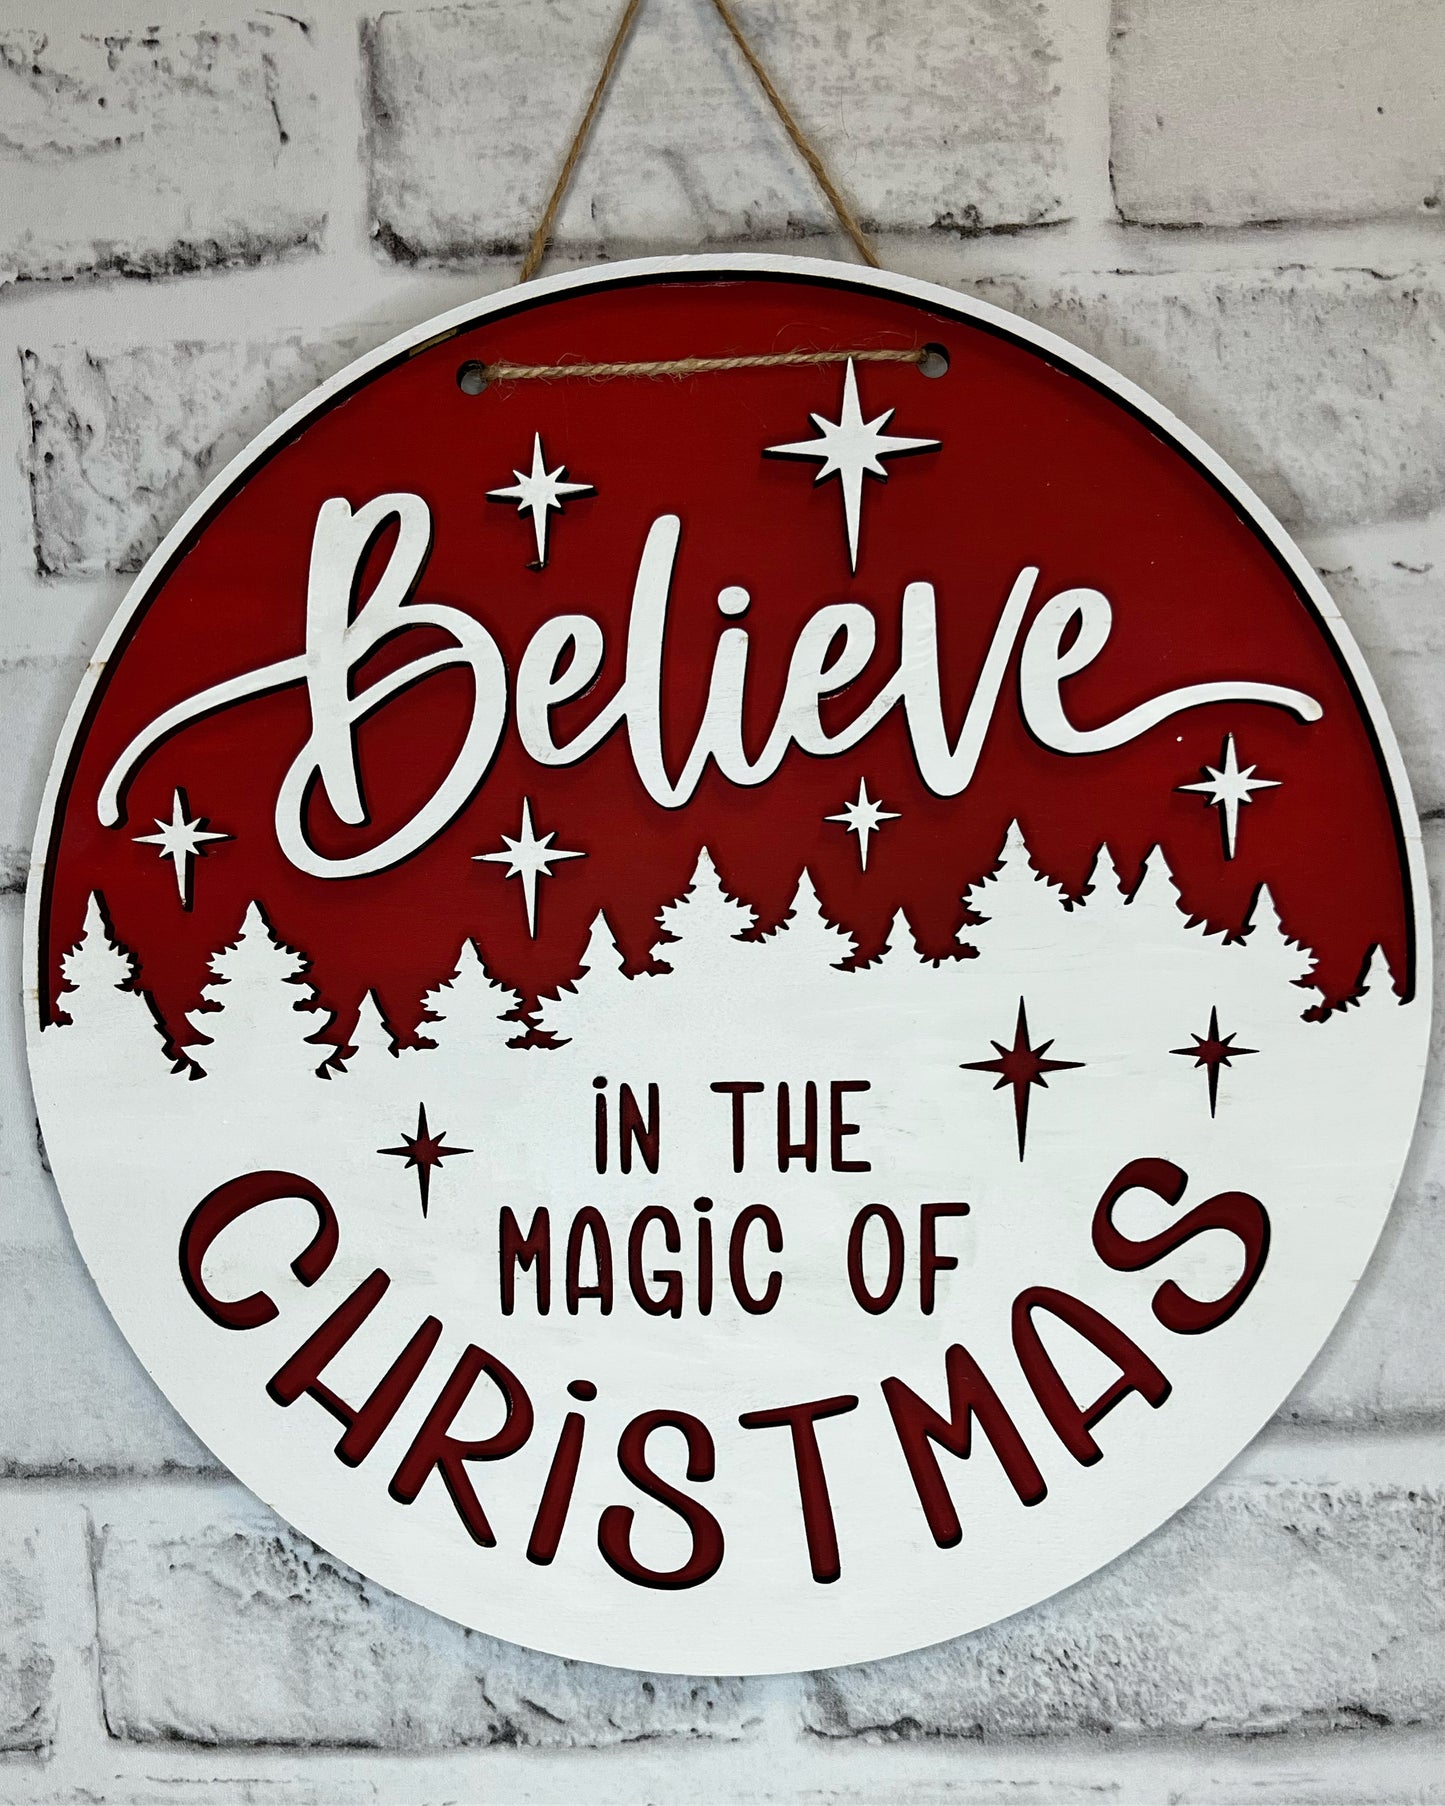 Believe In the Magic of Christmas